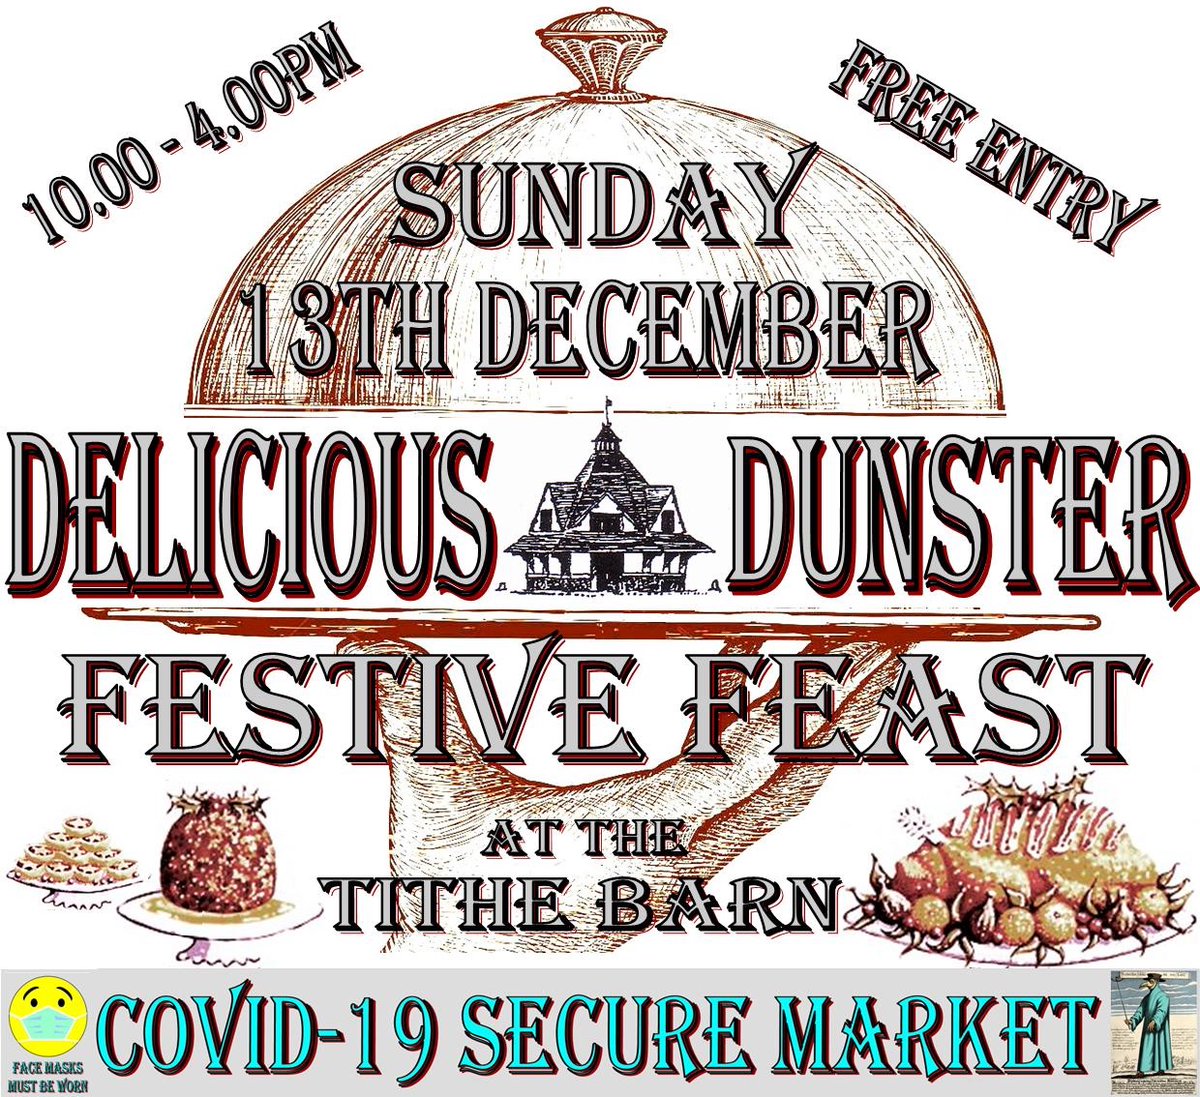 Something special is being served this #Sunday at Dunster's historic Tithe Barn. Make a date with #Dunster this December! #FoodMarket #FestiveFeast #Exmoor